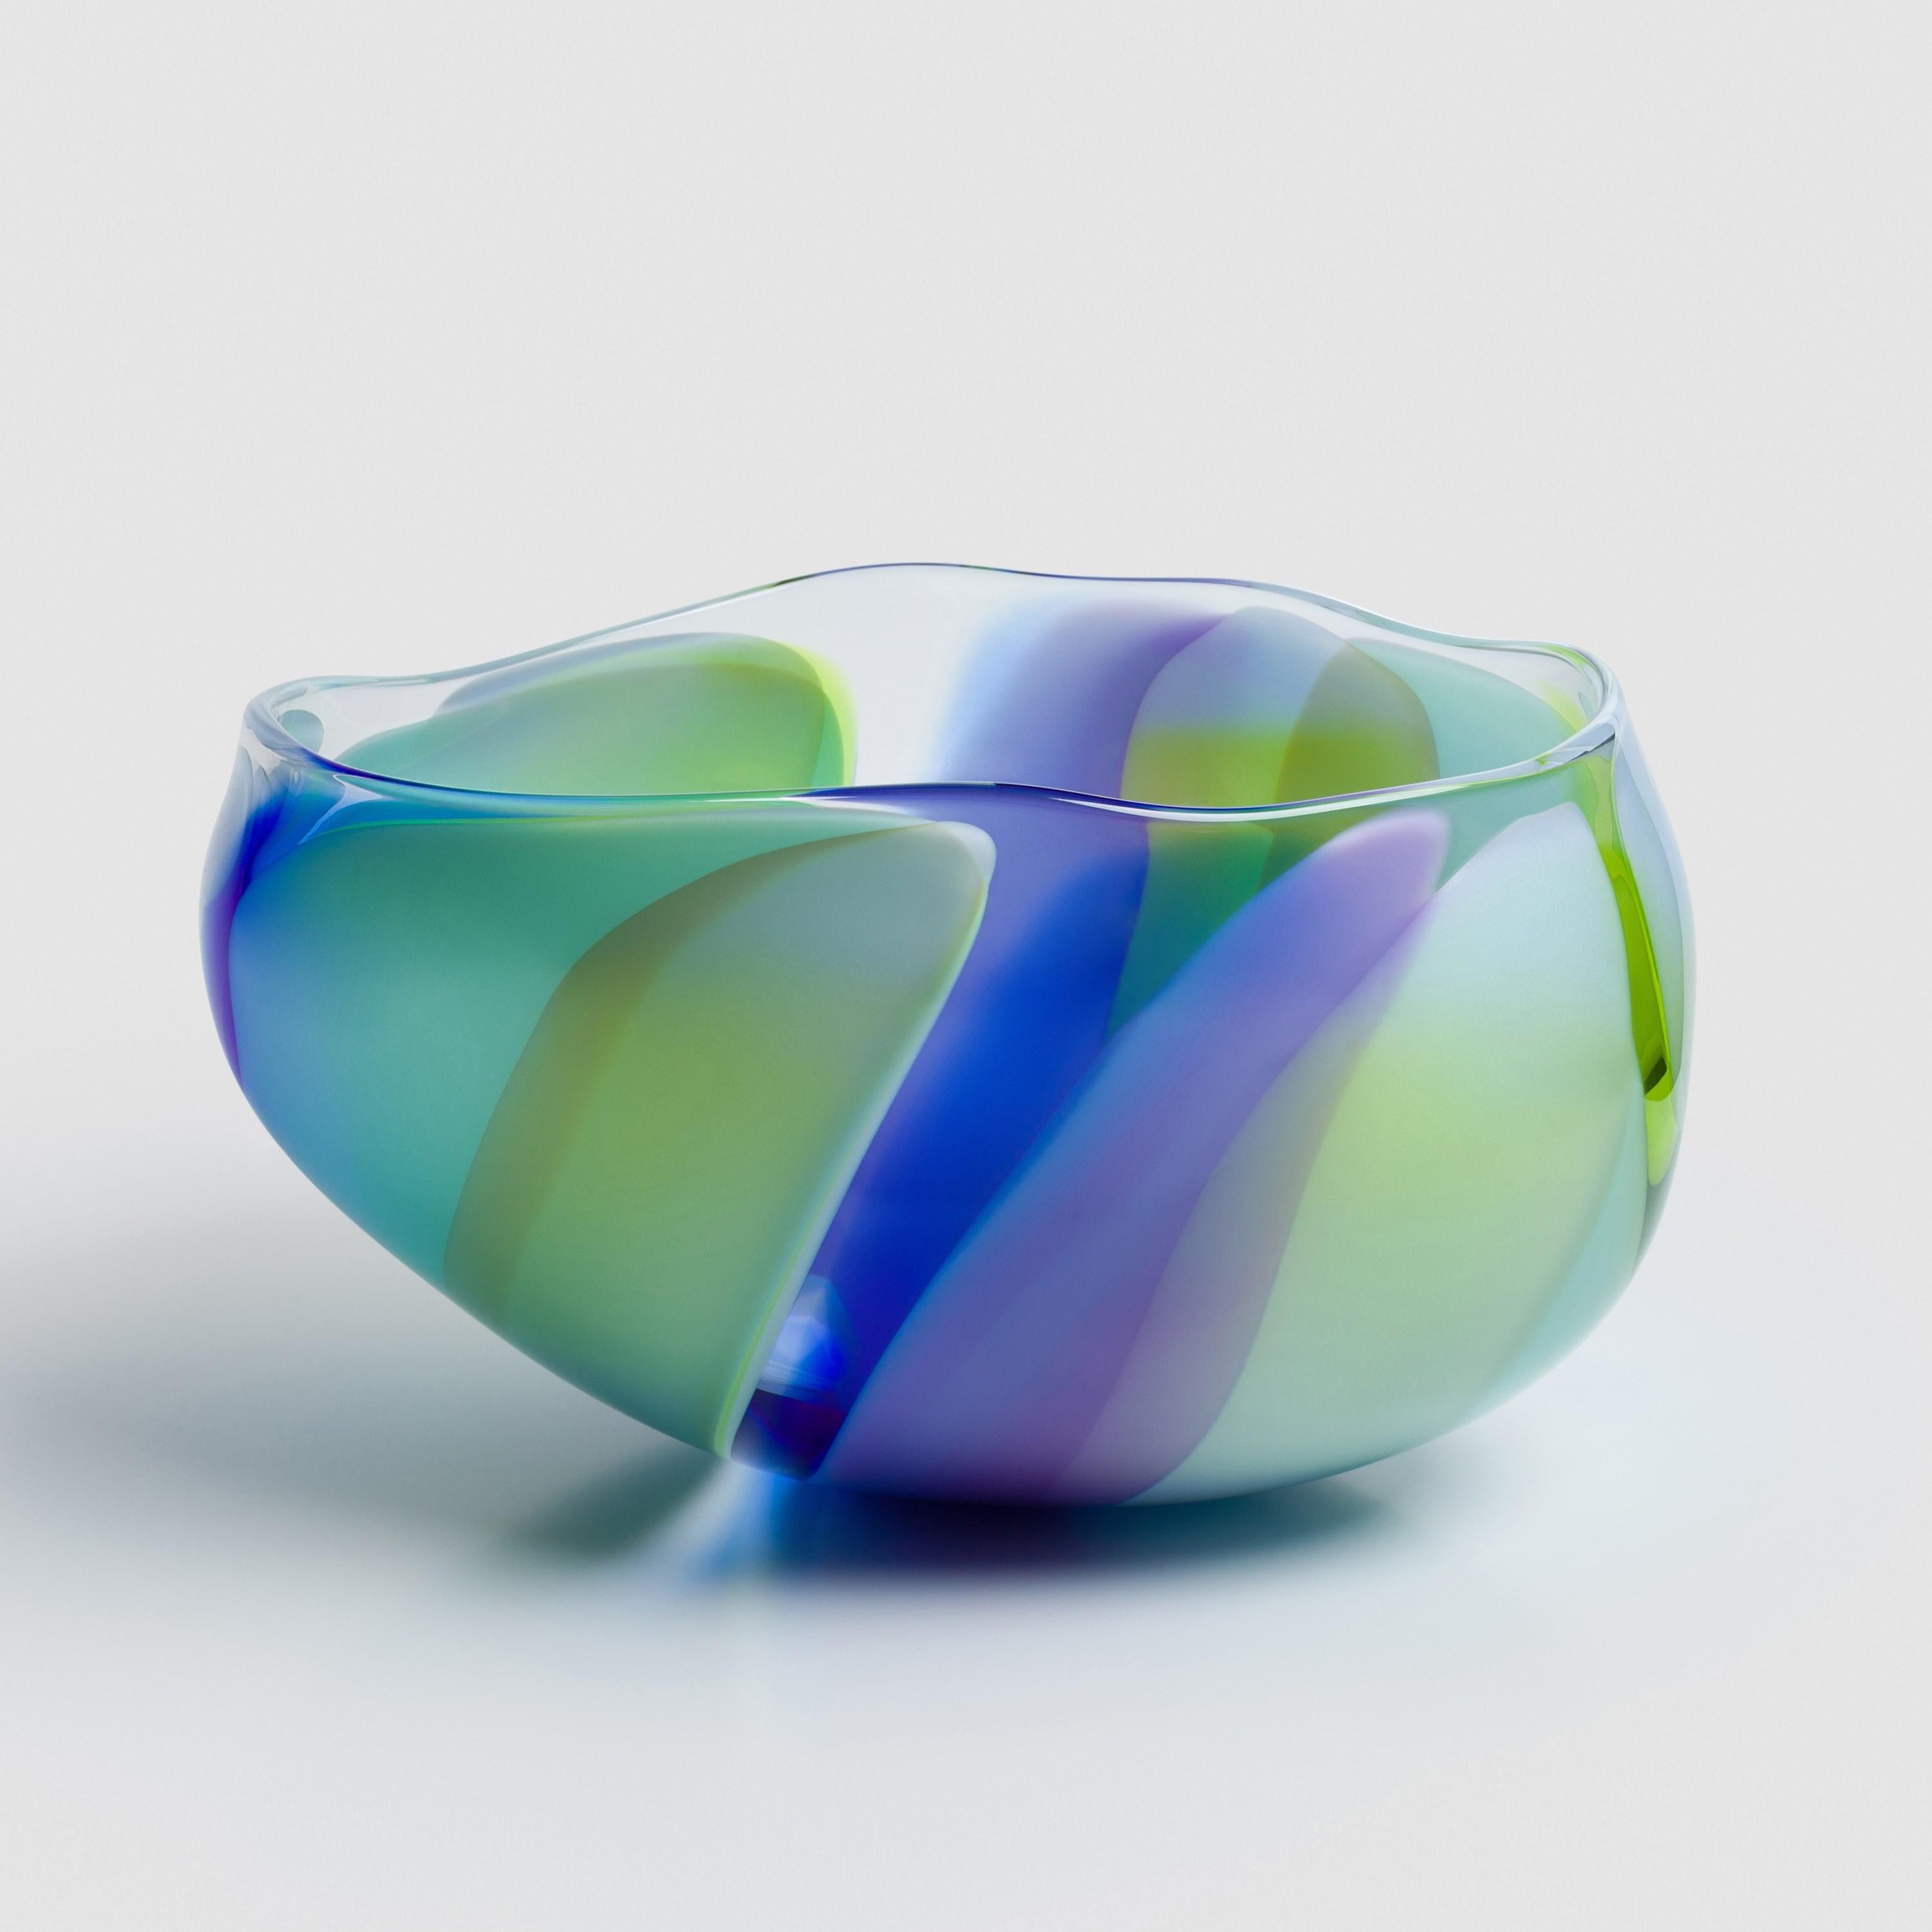 'Waves No 654' is a handblown glass bowl by the British artist, Neil Wilkin.

'Waves' is a collection of beautifully crafted, unique glass bowls and centrepieces by the British artist Neil Wilkin. Taking a painterly approach, Neil Wilkin merges his